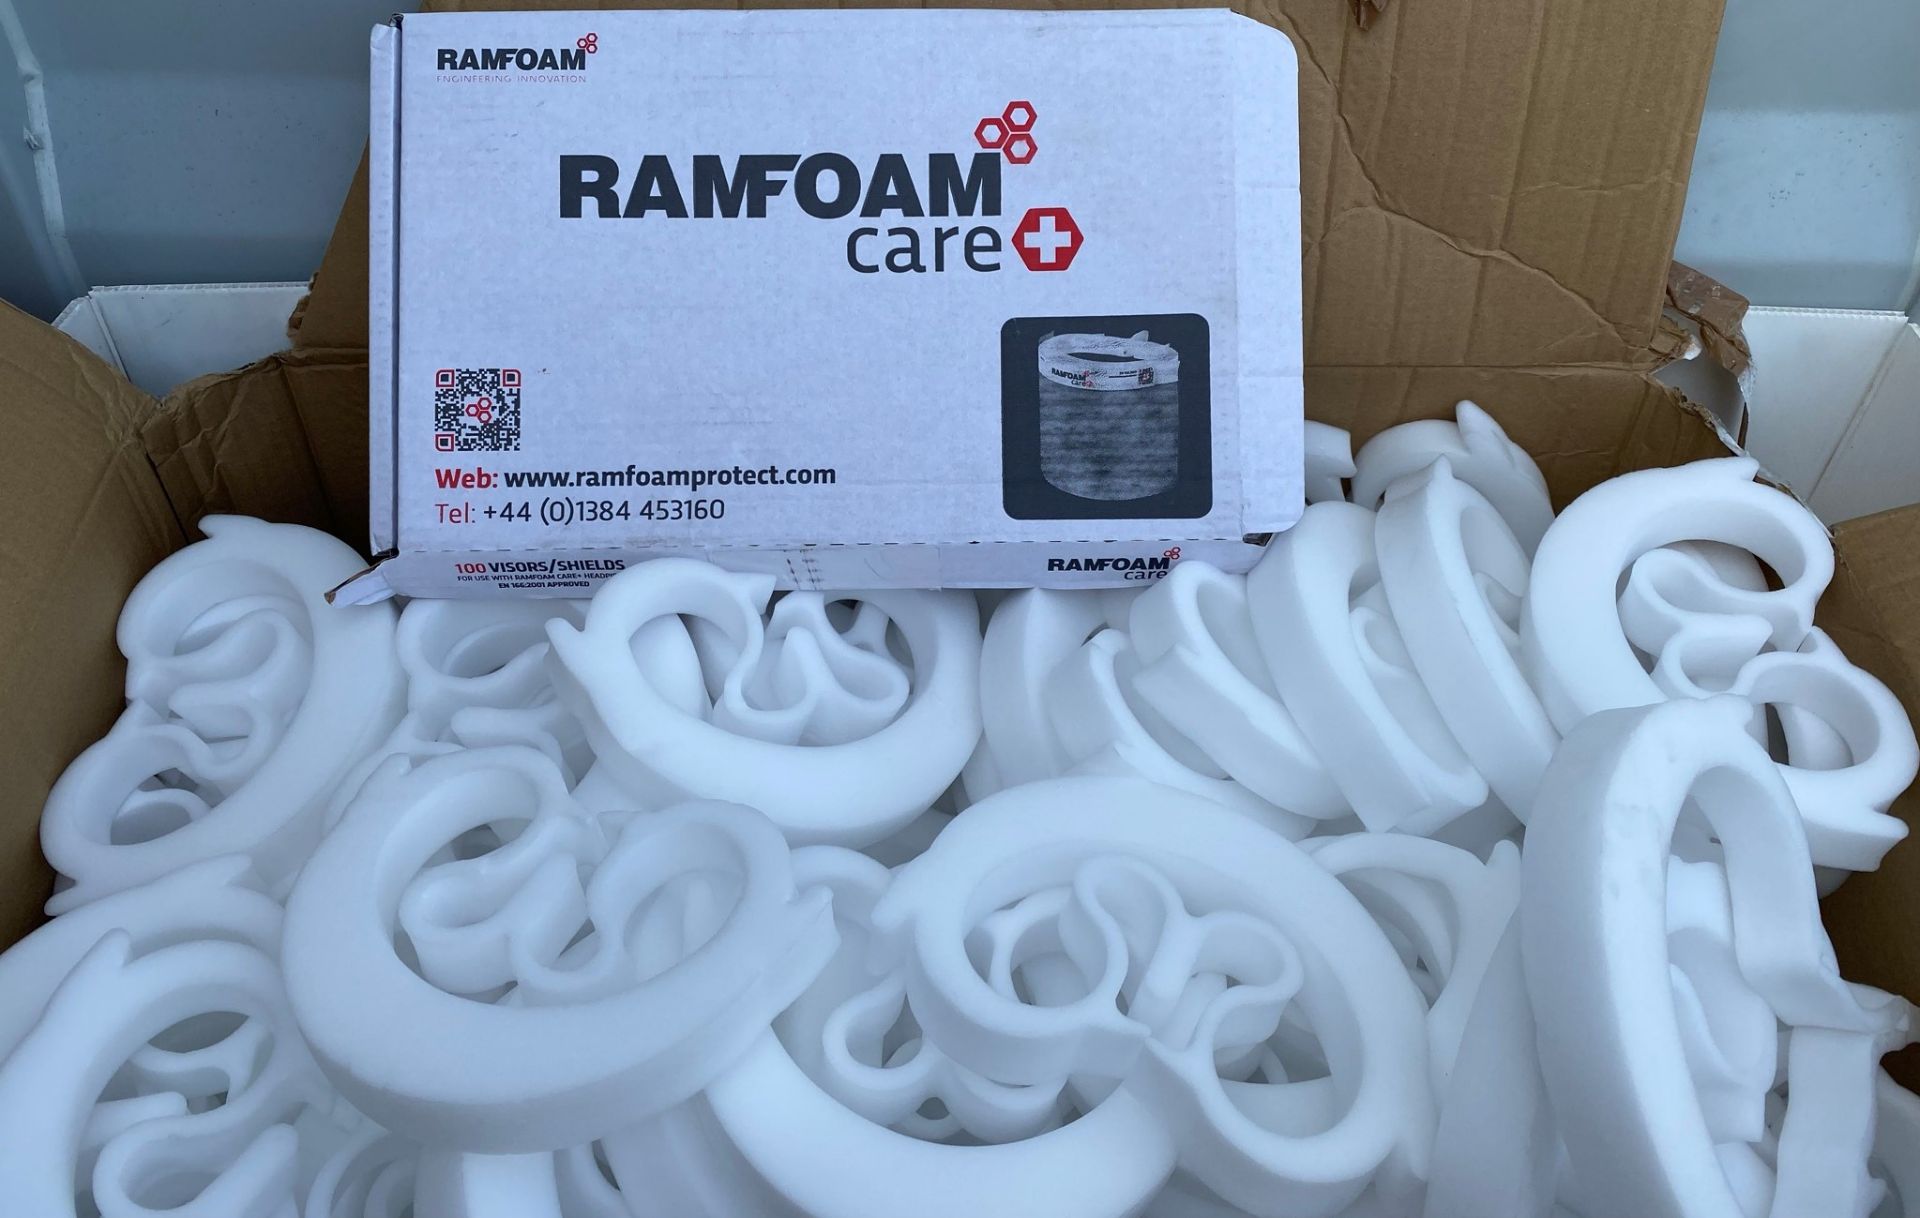 Contents to box 100 x Ramfoam Care+ Medical Visors - Product ref. - Image 2 of 4